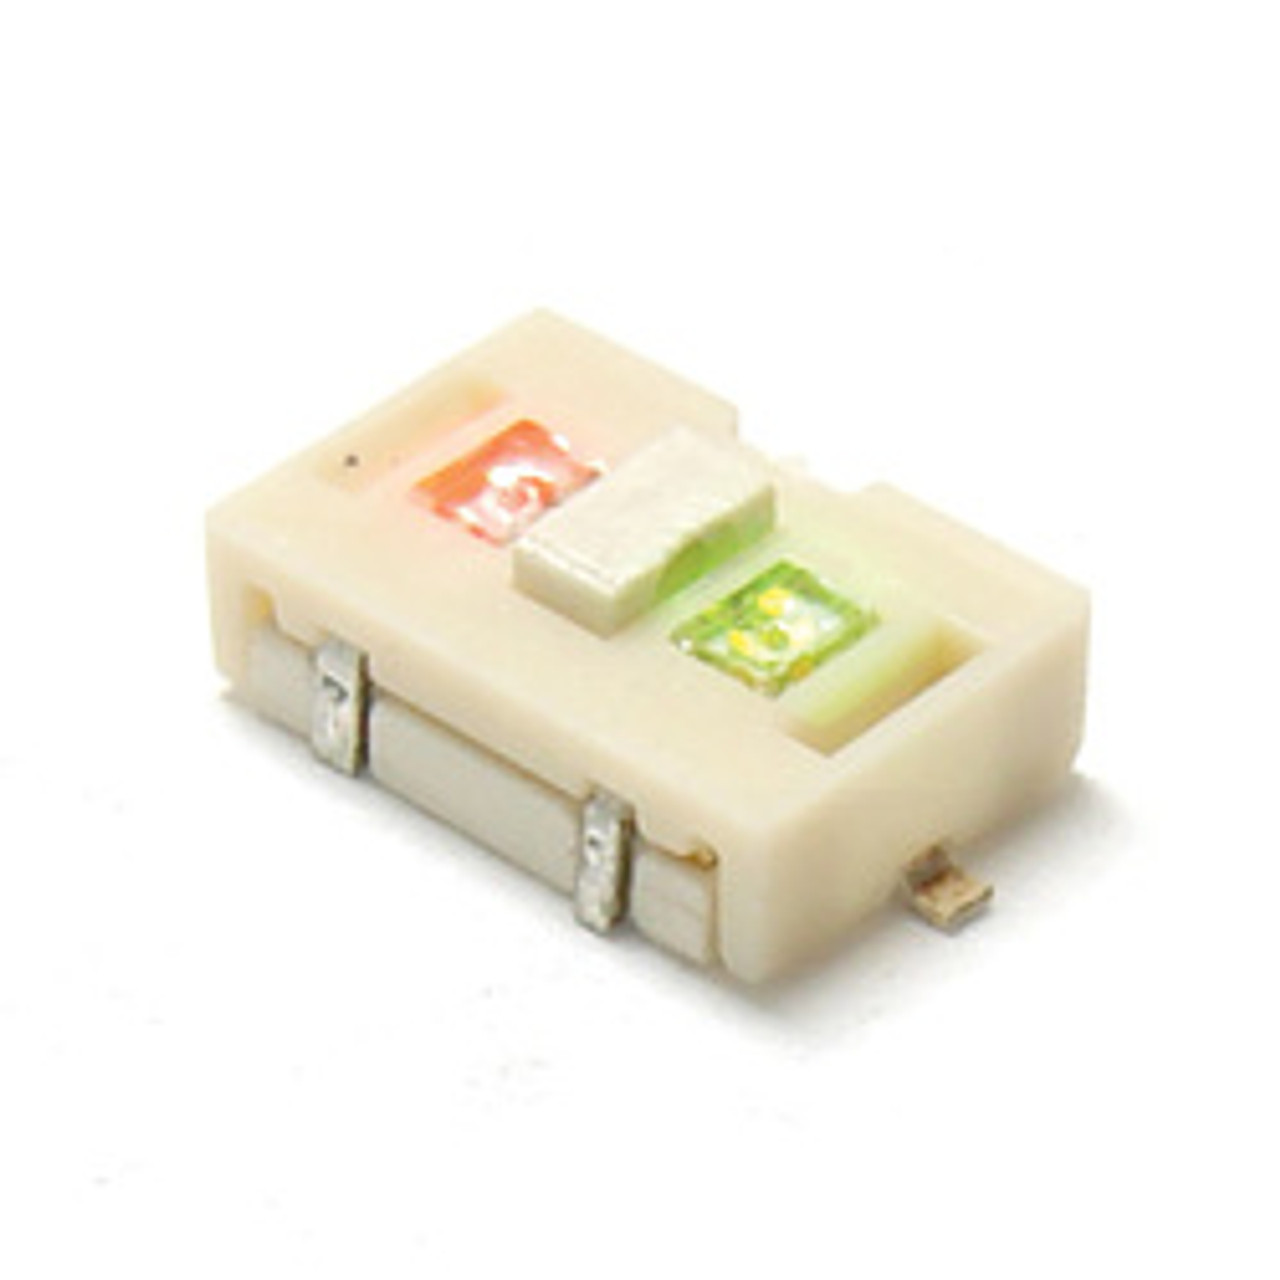 E-Switch TL-3200-A-F160-Y-N-R Tactile Switches